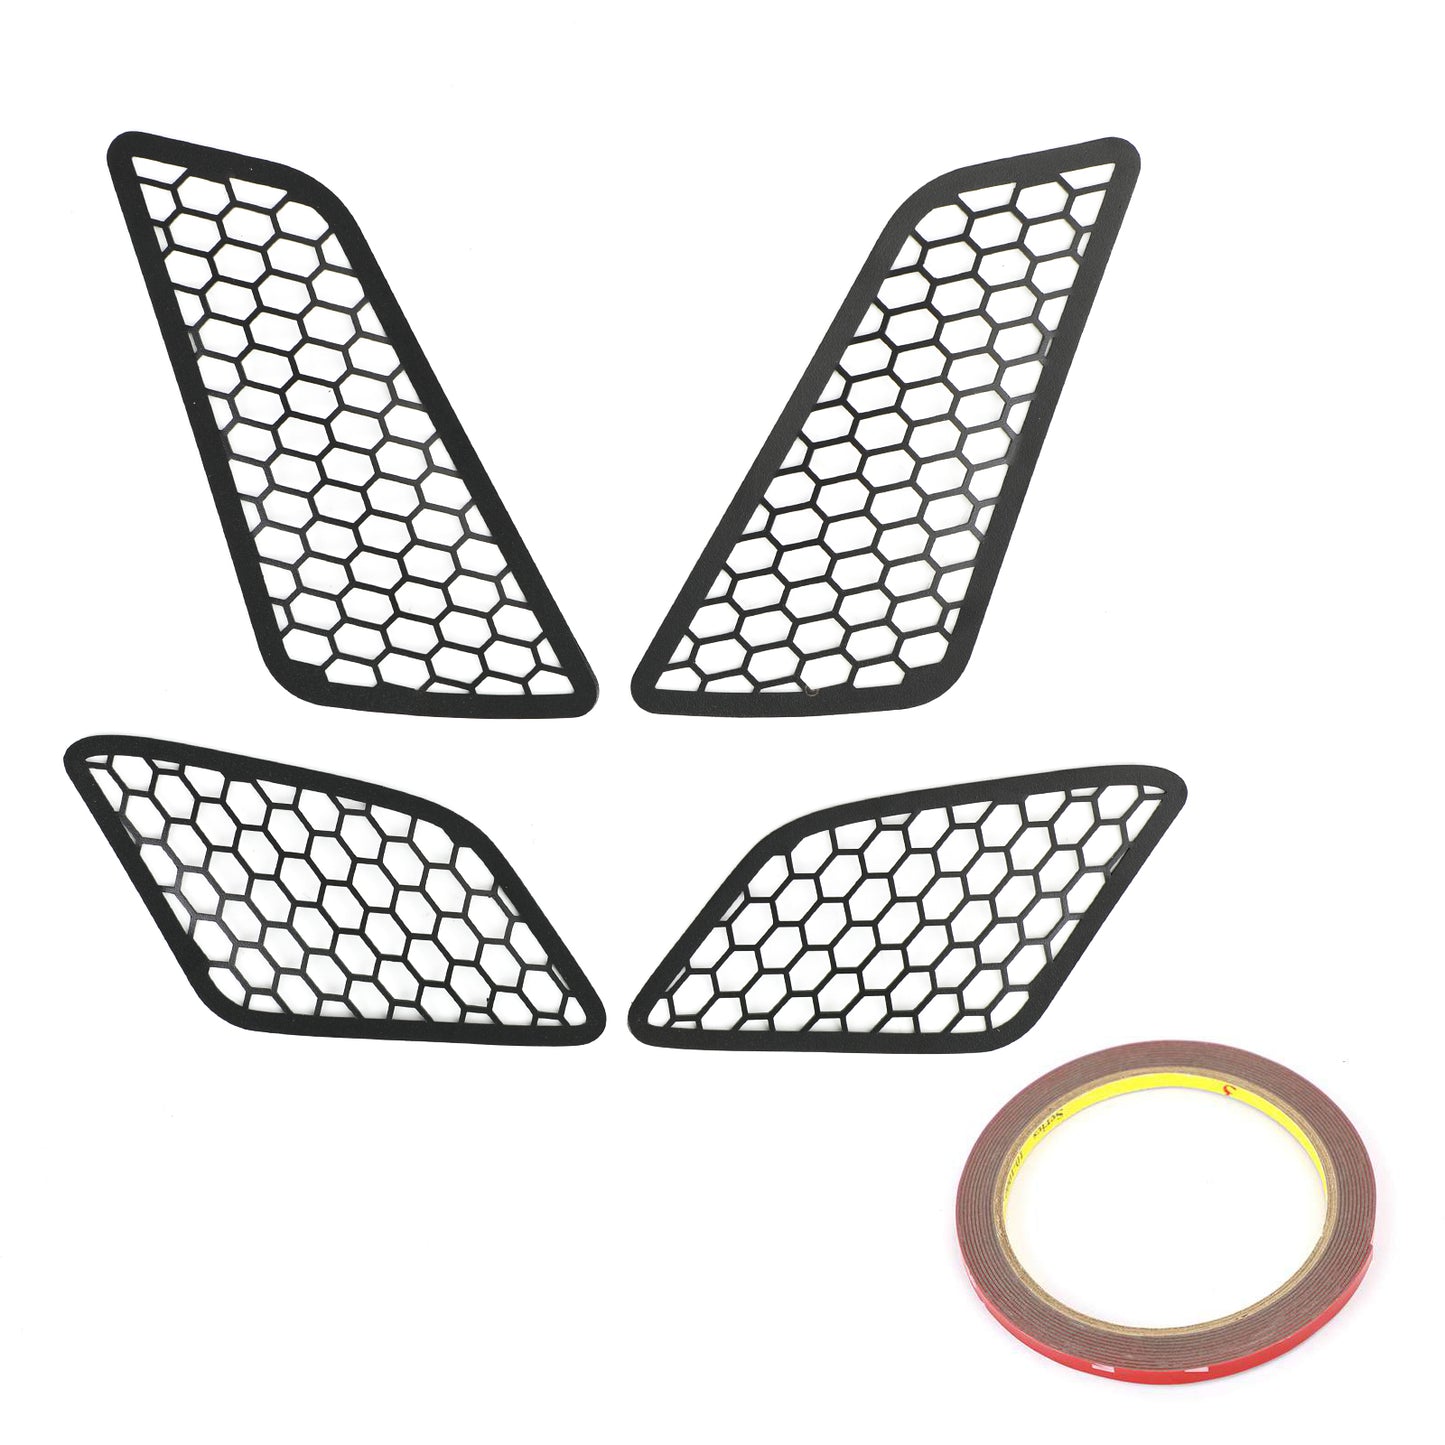 Areyourshop Motorcycle Turn Signal Light Protector Guard Cover for VESPA GTS 125 200 300